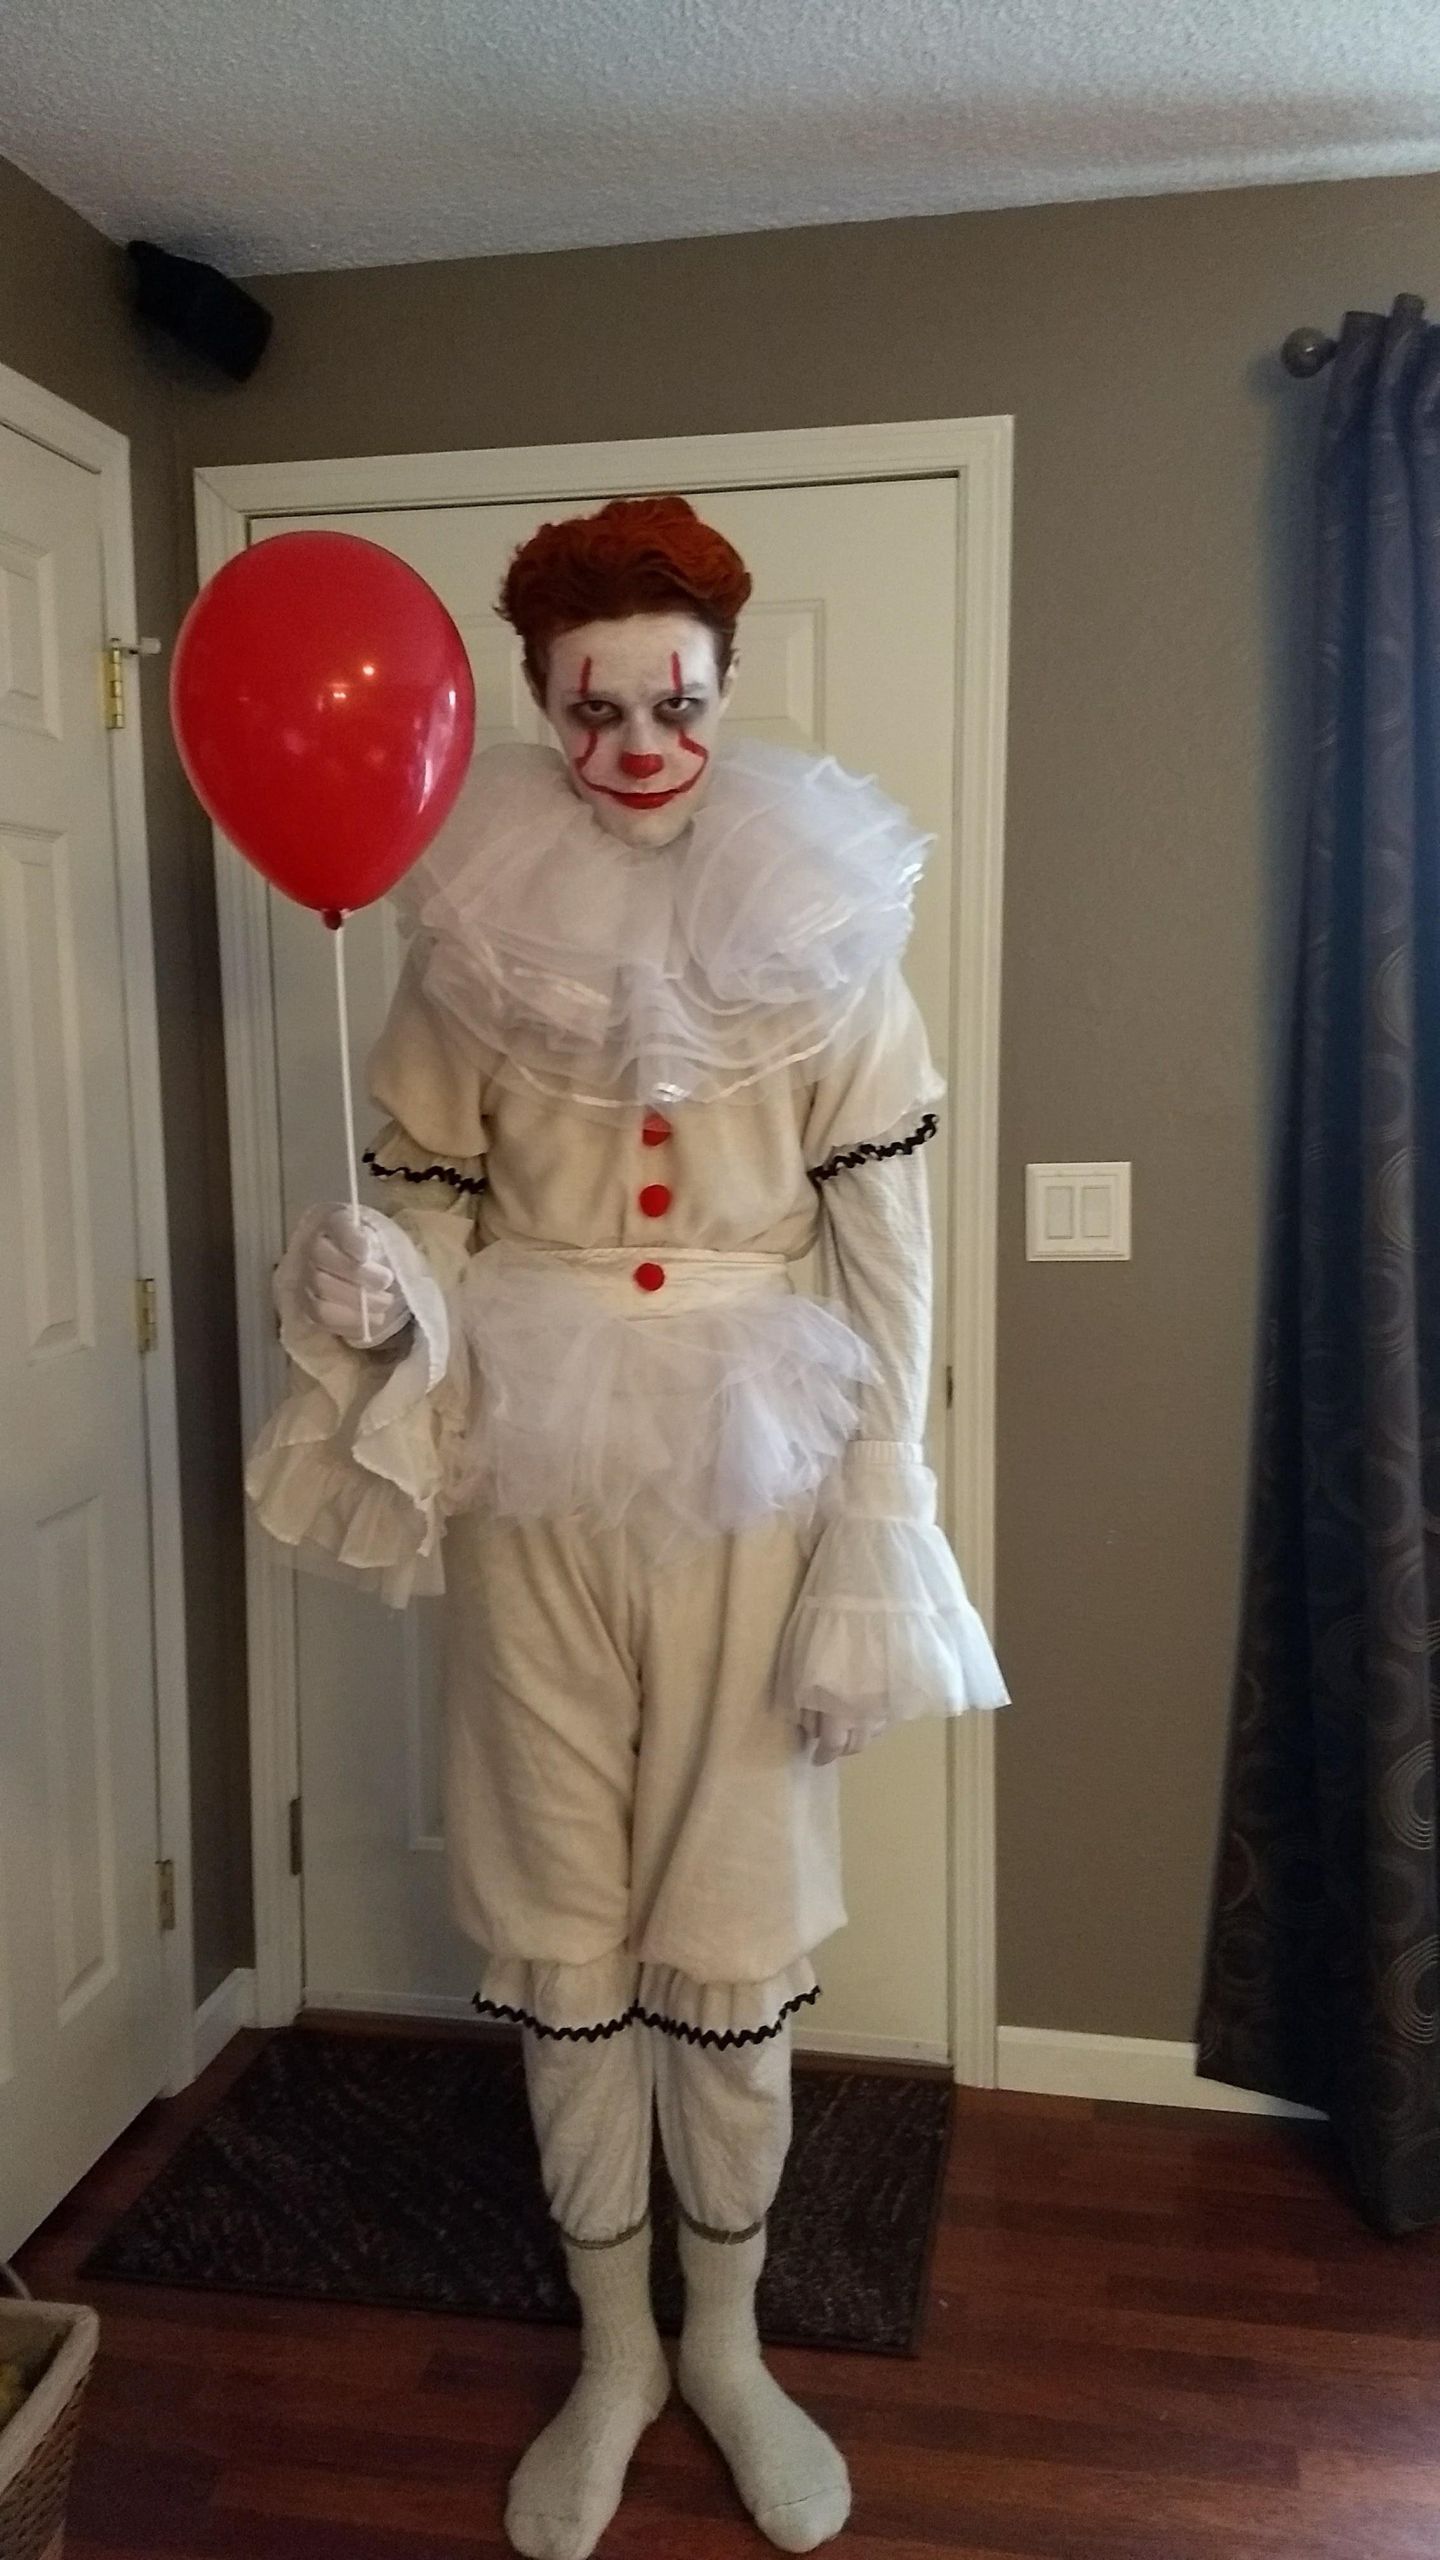 DIY Pennywise Costume
 I made a Pennywise costume for Halloween pics